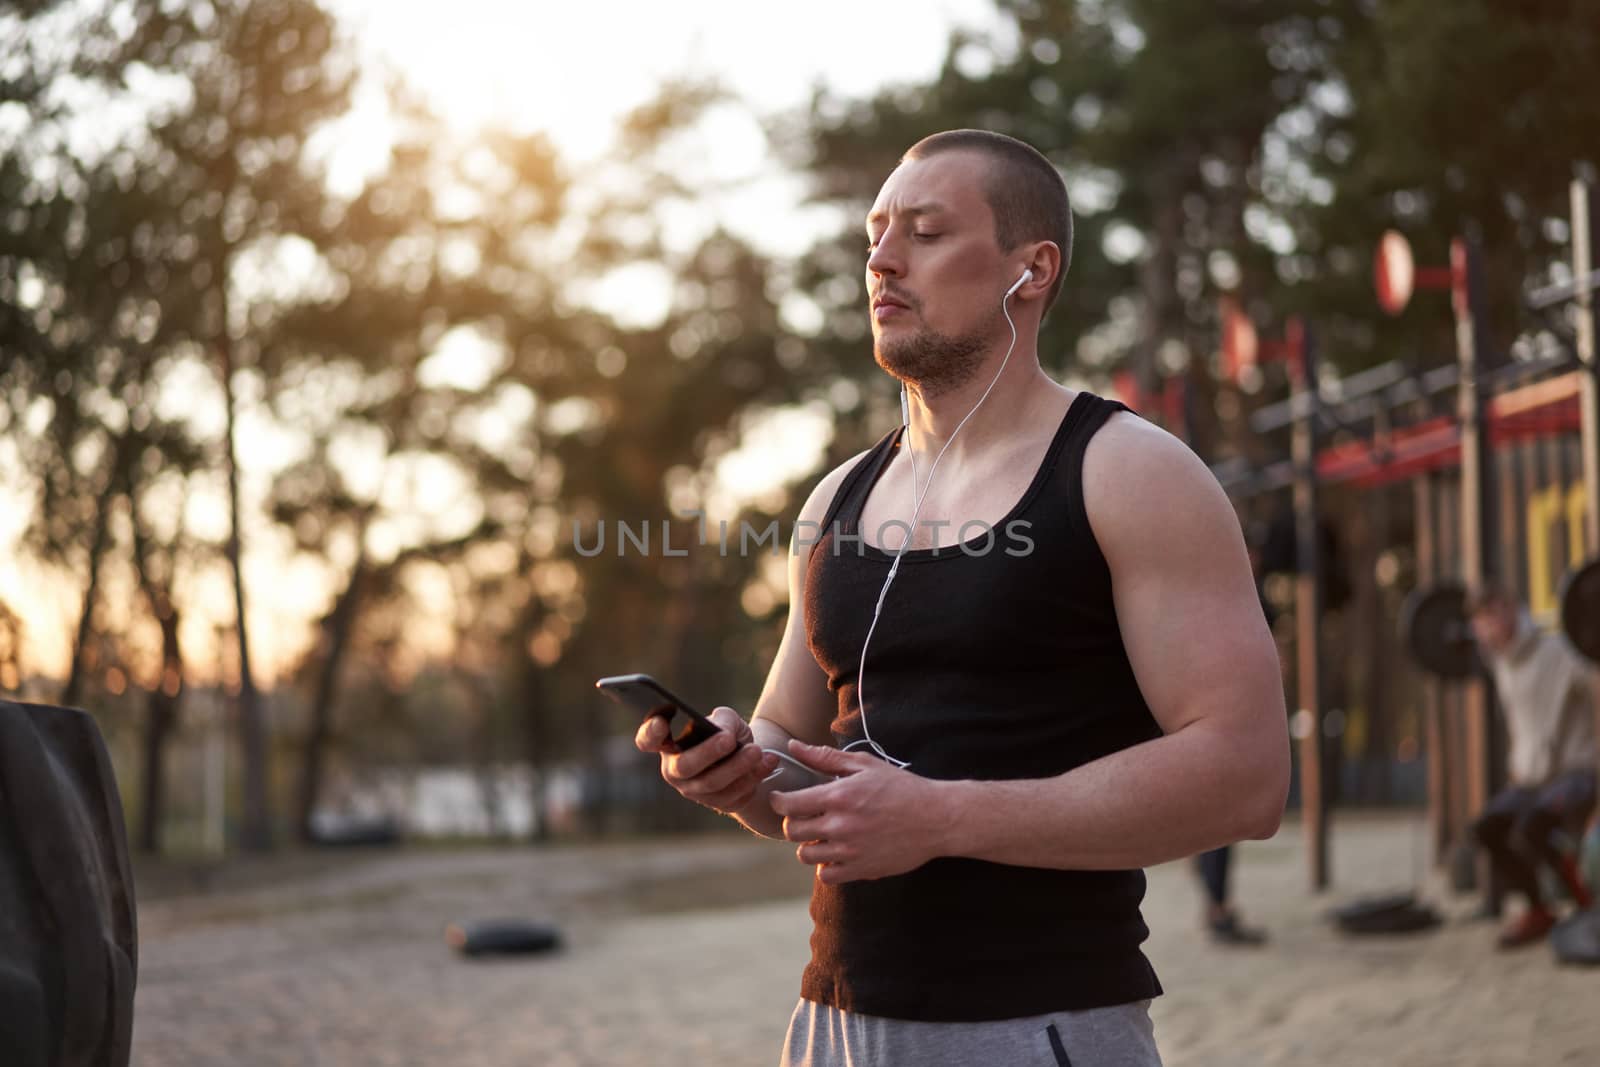 Young adult caucasian athlete listening phone music white headphones after workout. Handsome sportsman resting after cross training exercises sunset background. Healthy lifestyle concept.